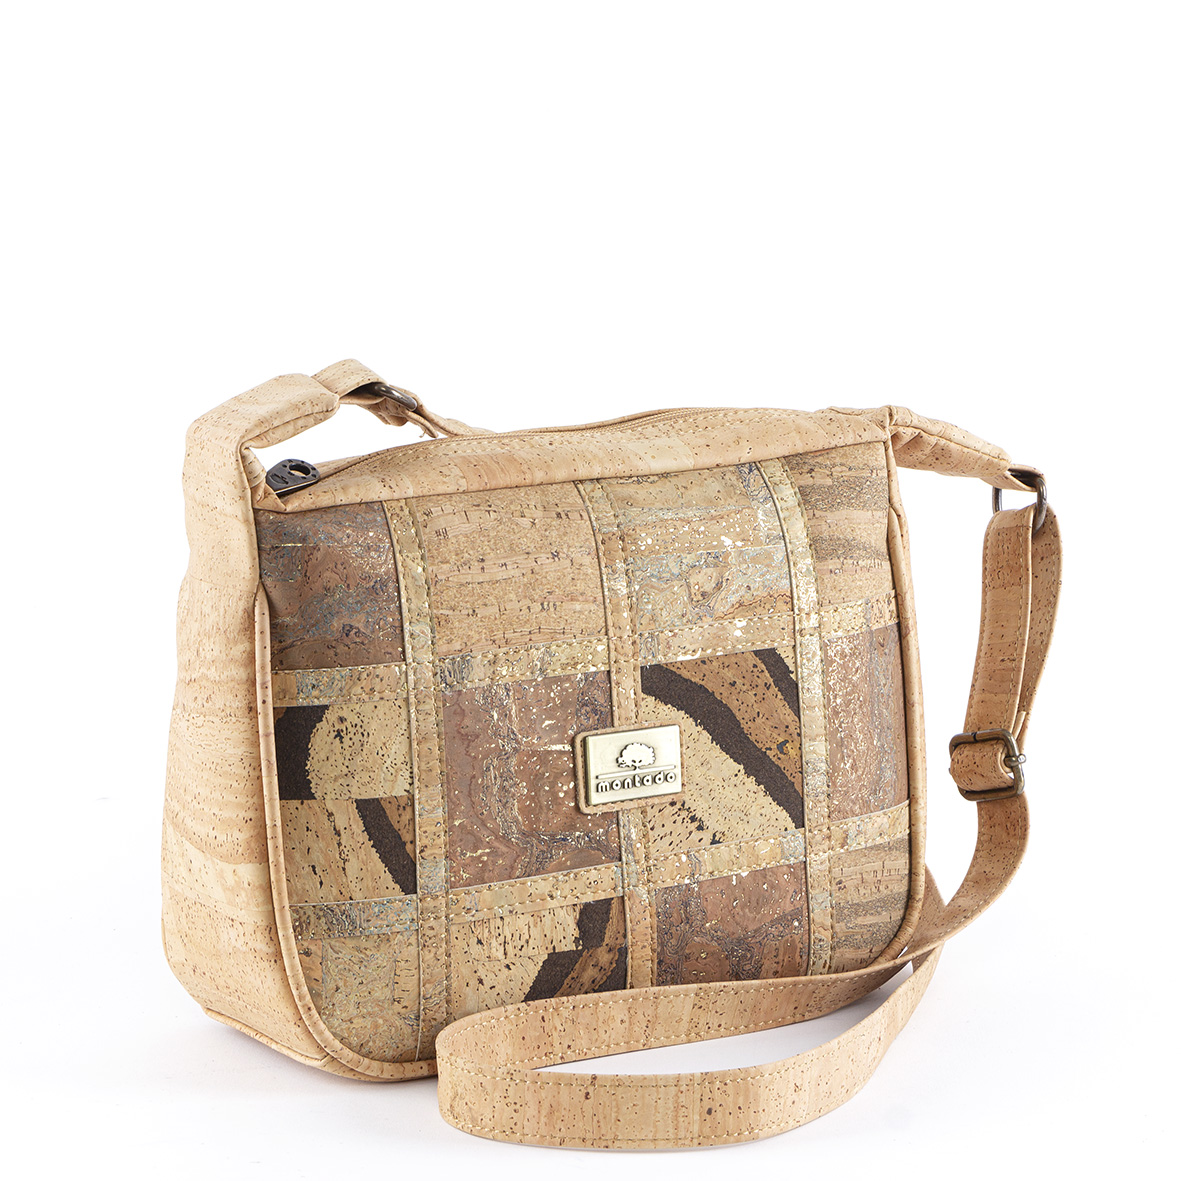 Cork Bags - Vegan Crossing Bag in Cork with Patchwork Pattern on the Front